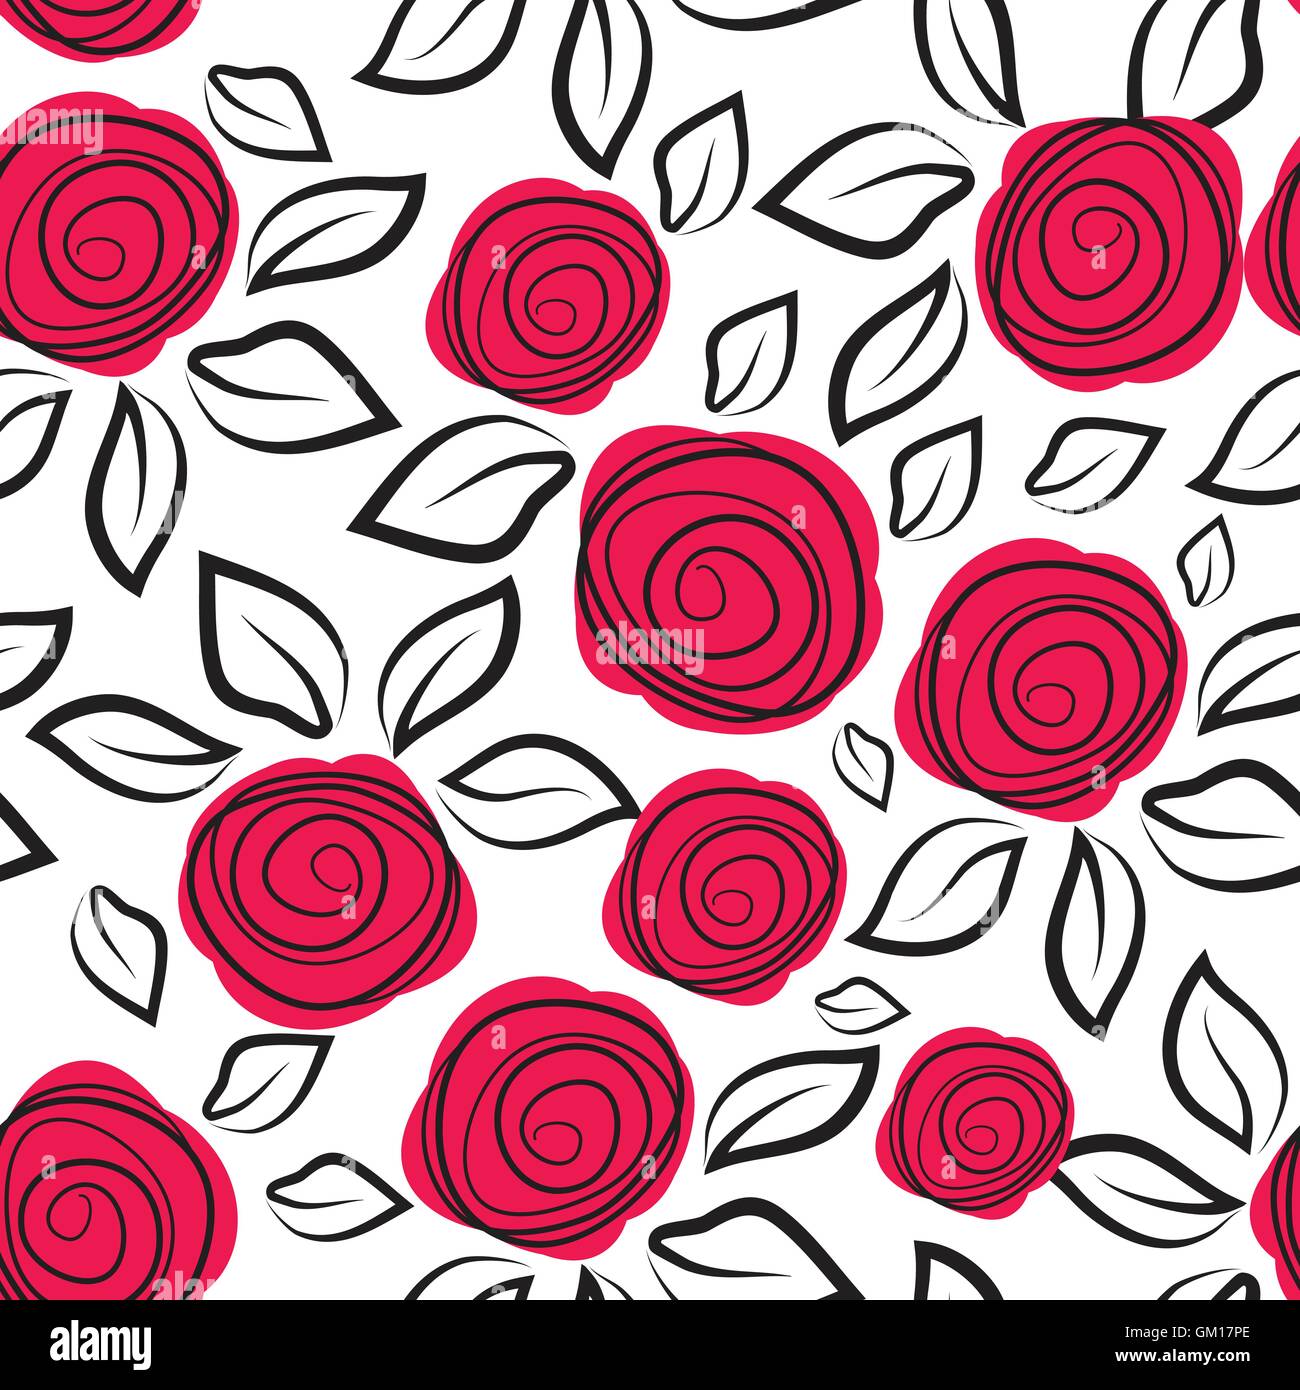 Seamless pattern with abstract rose flowers. Stock Vector